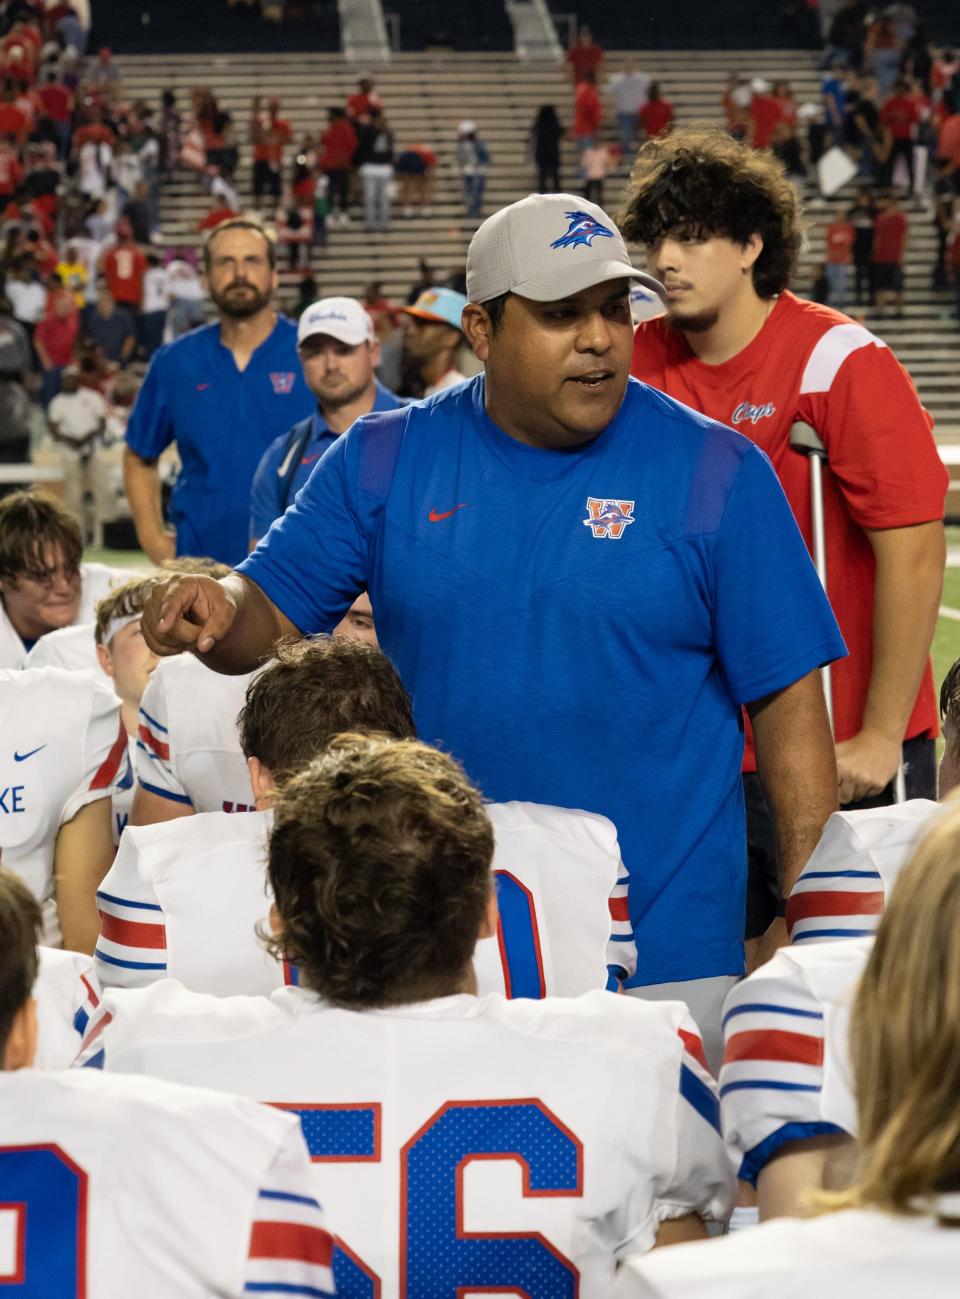 Westlake head coach Tony Salazar was defensive coordinator for the Chaparrals when they won state titles from 2019 to 2021. He considers it a "benchmark" season when teams get to practice on Thanksgiving Day. That means the road to state in December is about to begin.